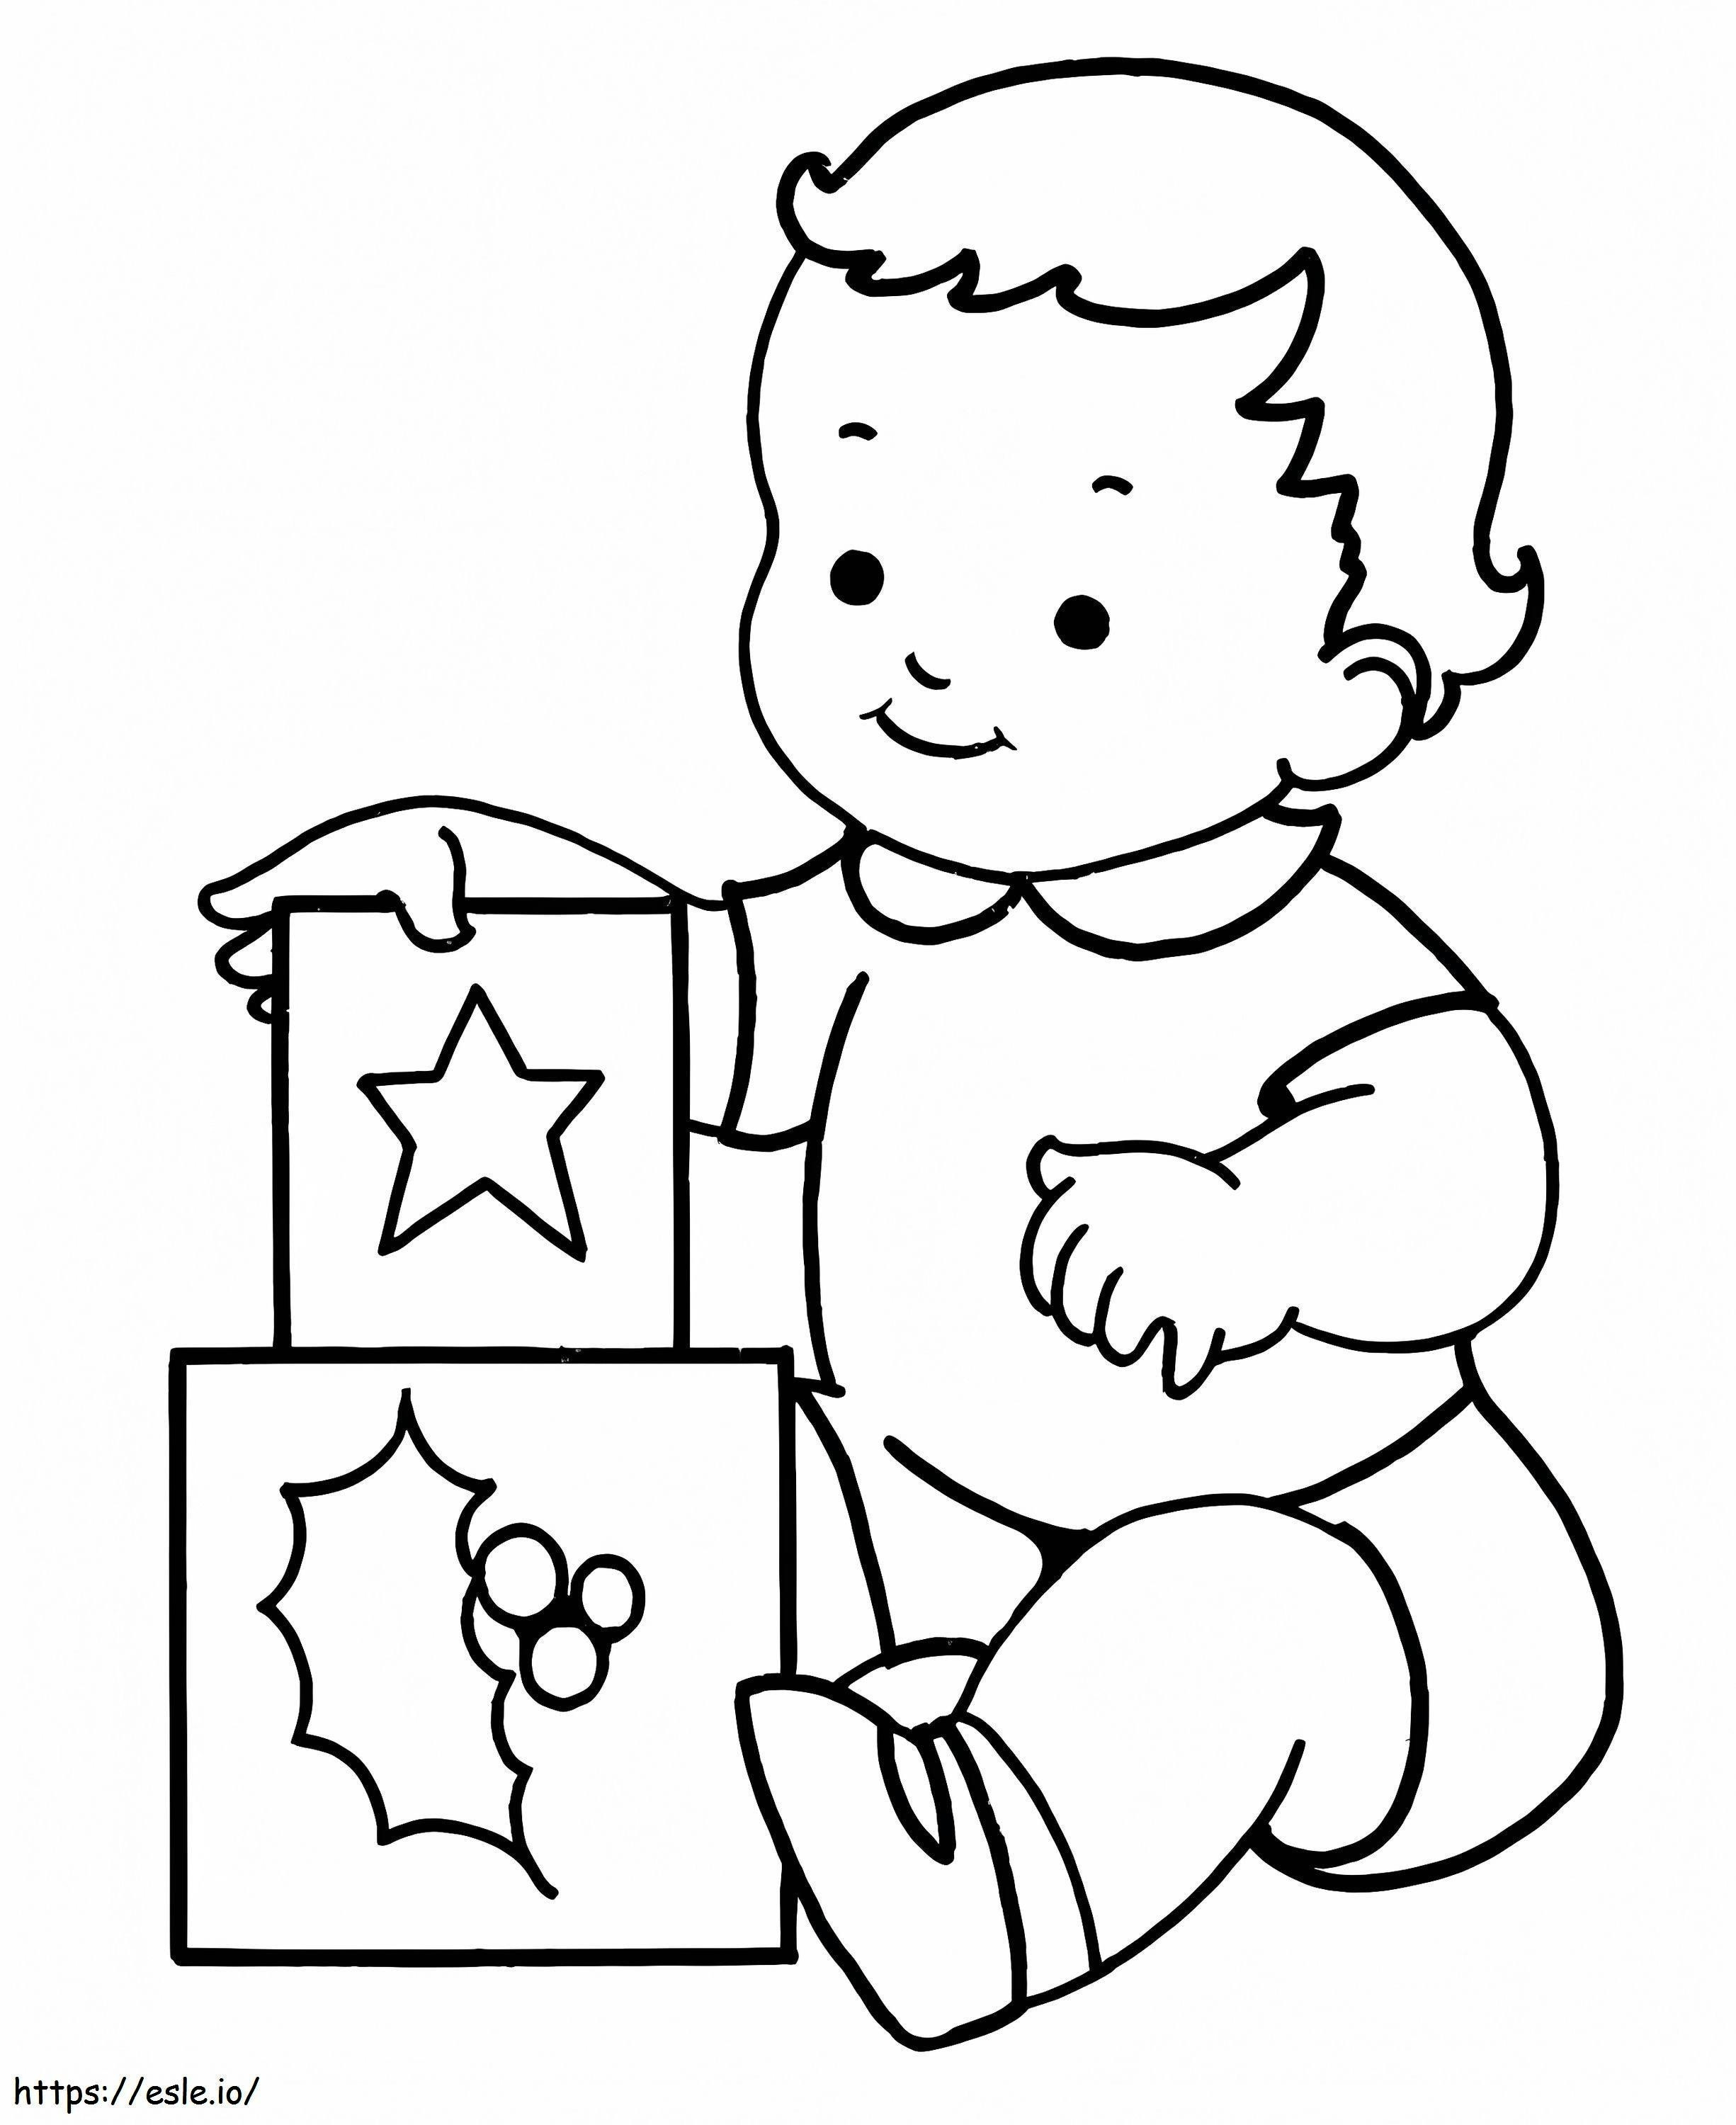 Children Playing Puzzles coloring page